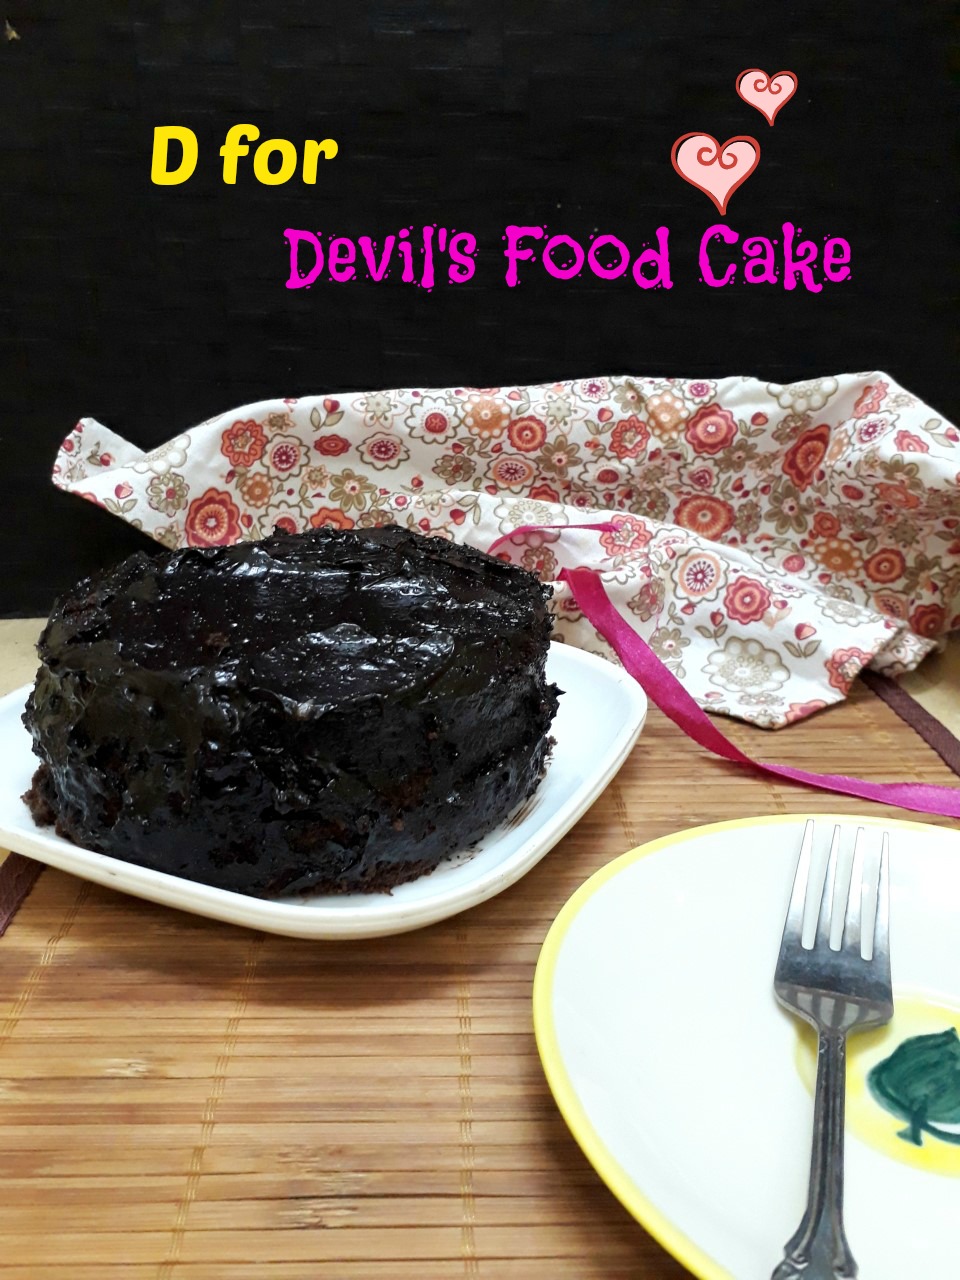 Devil's Food Cake from United States